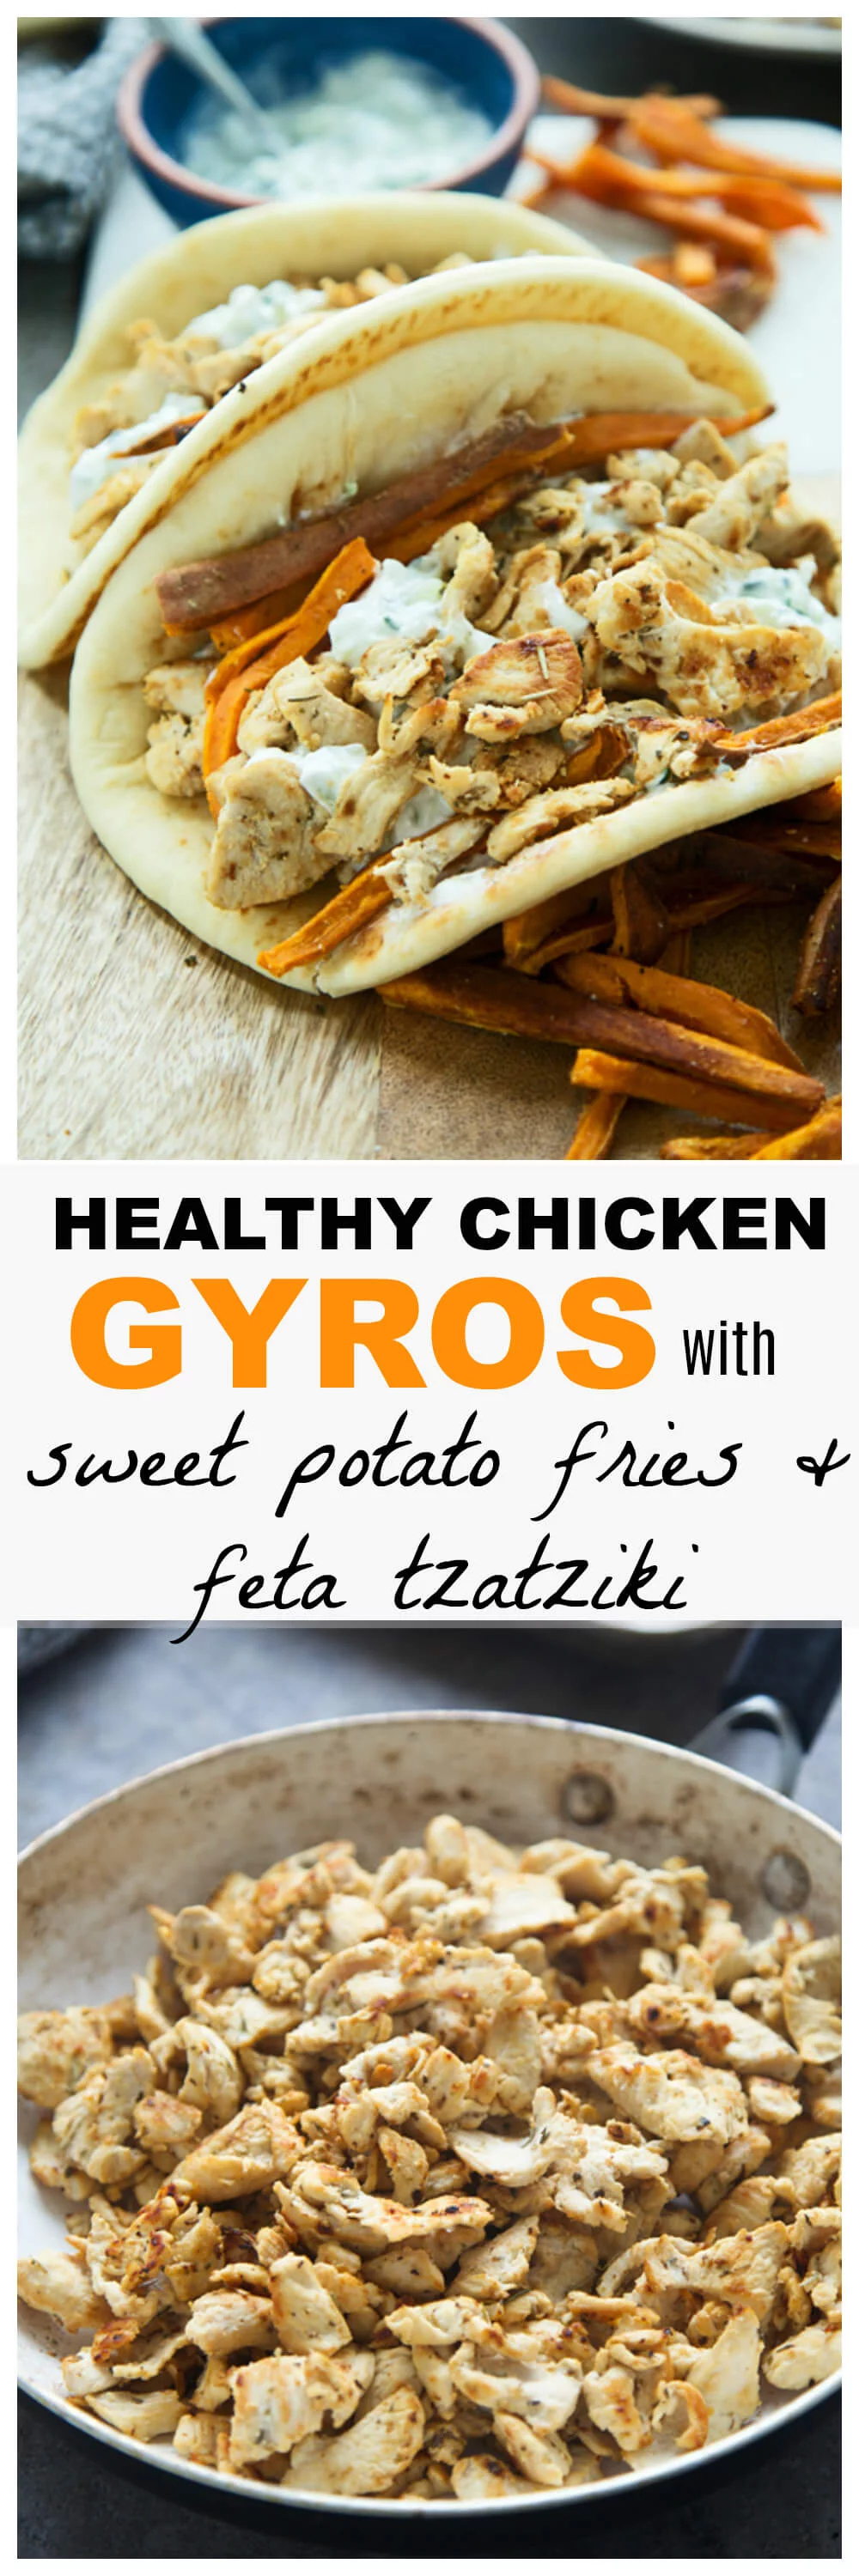 Healthy Chicken Gyros with Baked Sweet Potato Fries and and Easy Feta Tzatziki Sauce